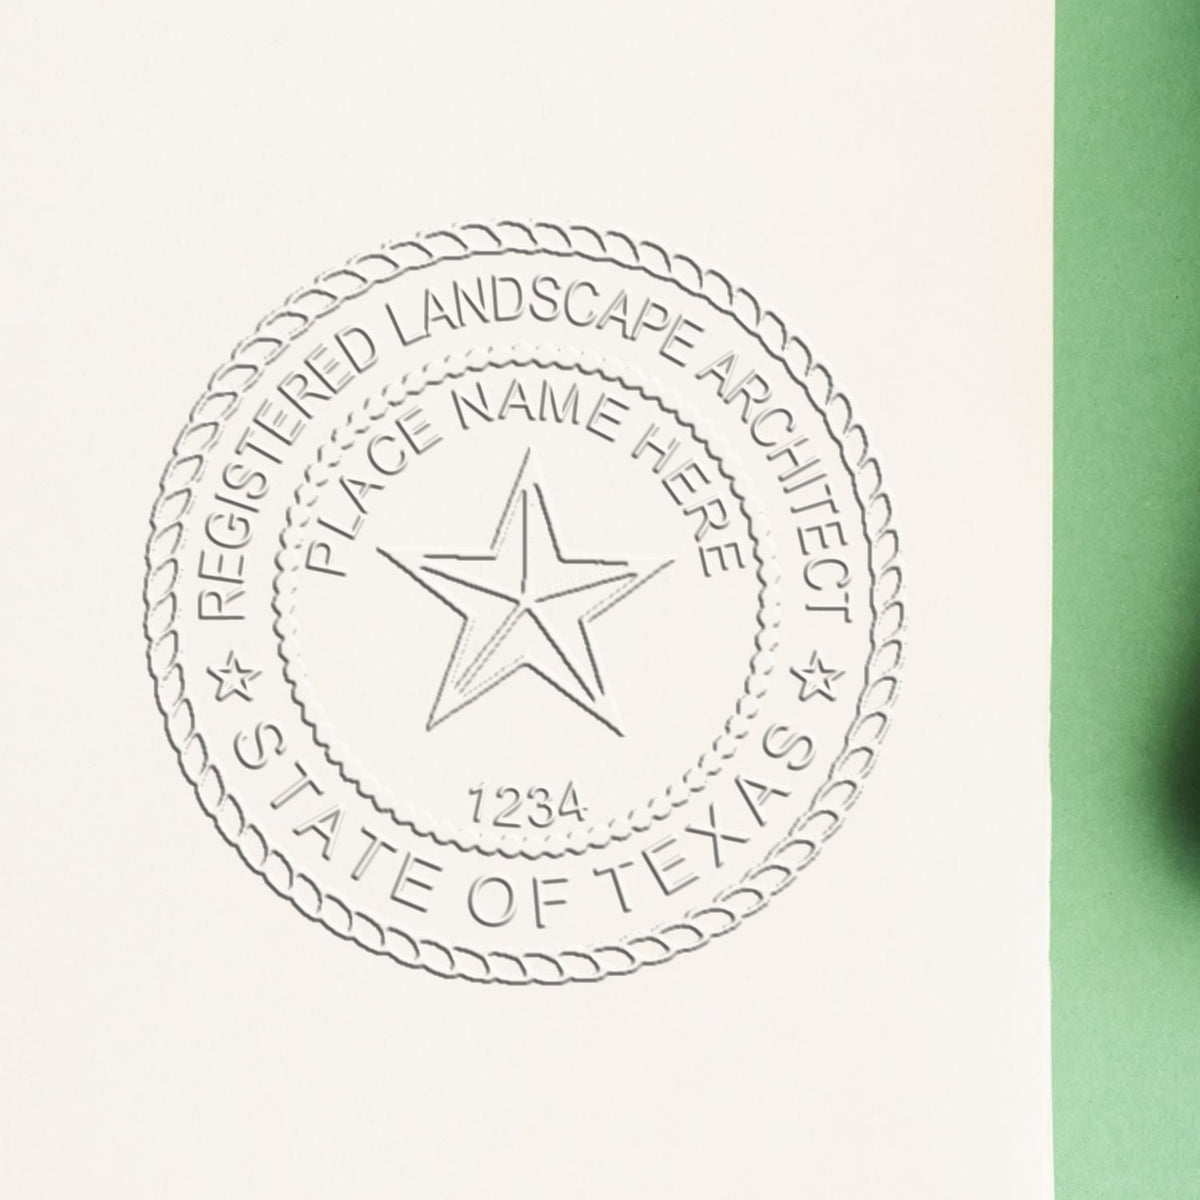 An in use photo of the Hybrid Texas Landscape Architect Seal showing a sample imprint on a cardstock